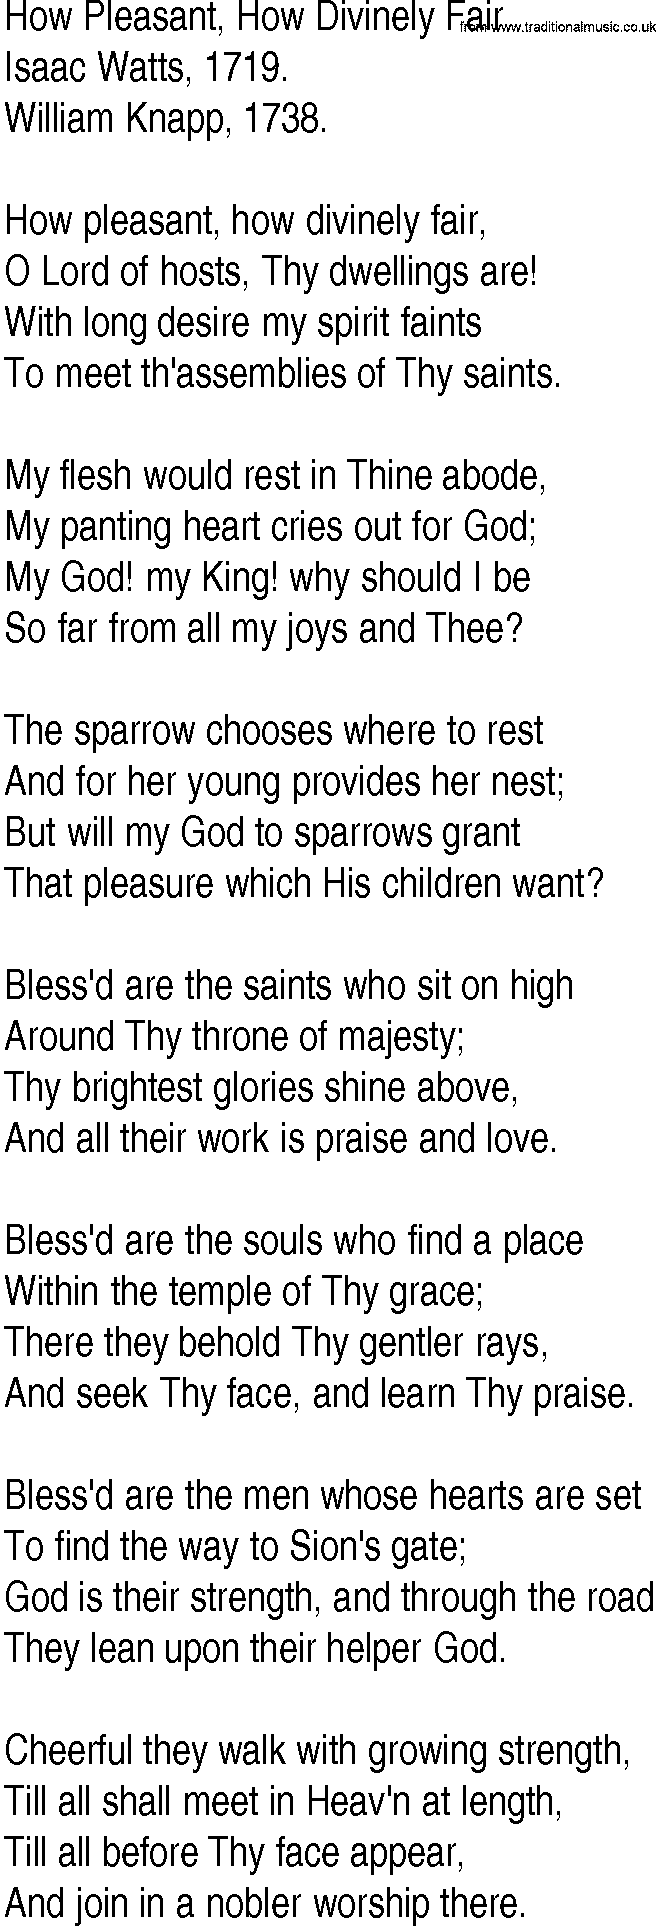 Hymn and Gospel Song: How Pleasant, How Divinely Fair by Isaac Watts lyrics